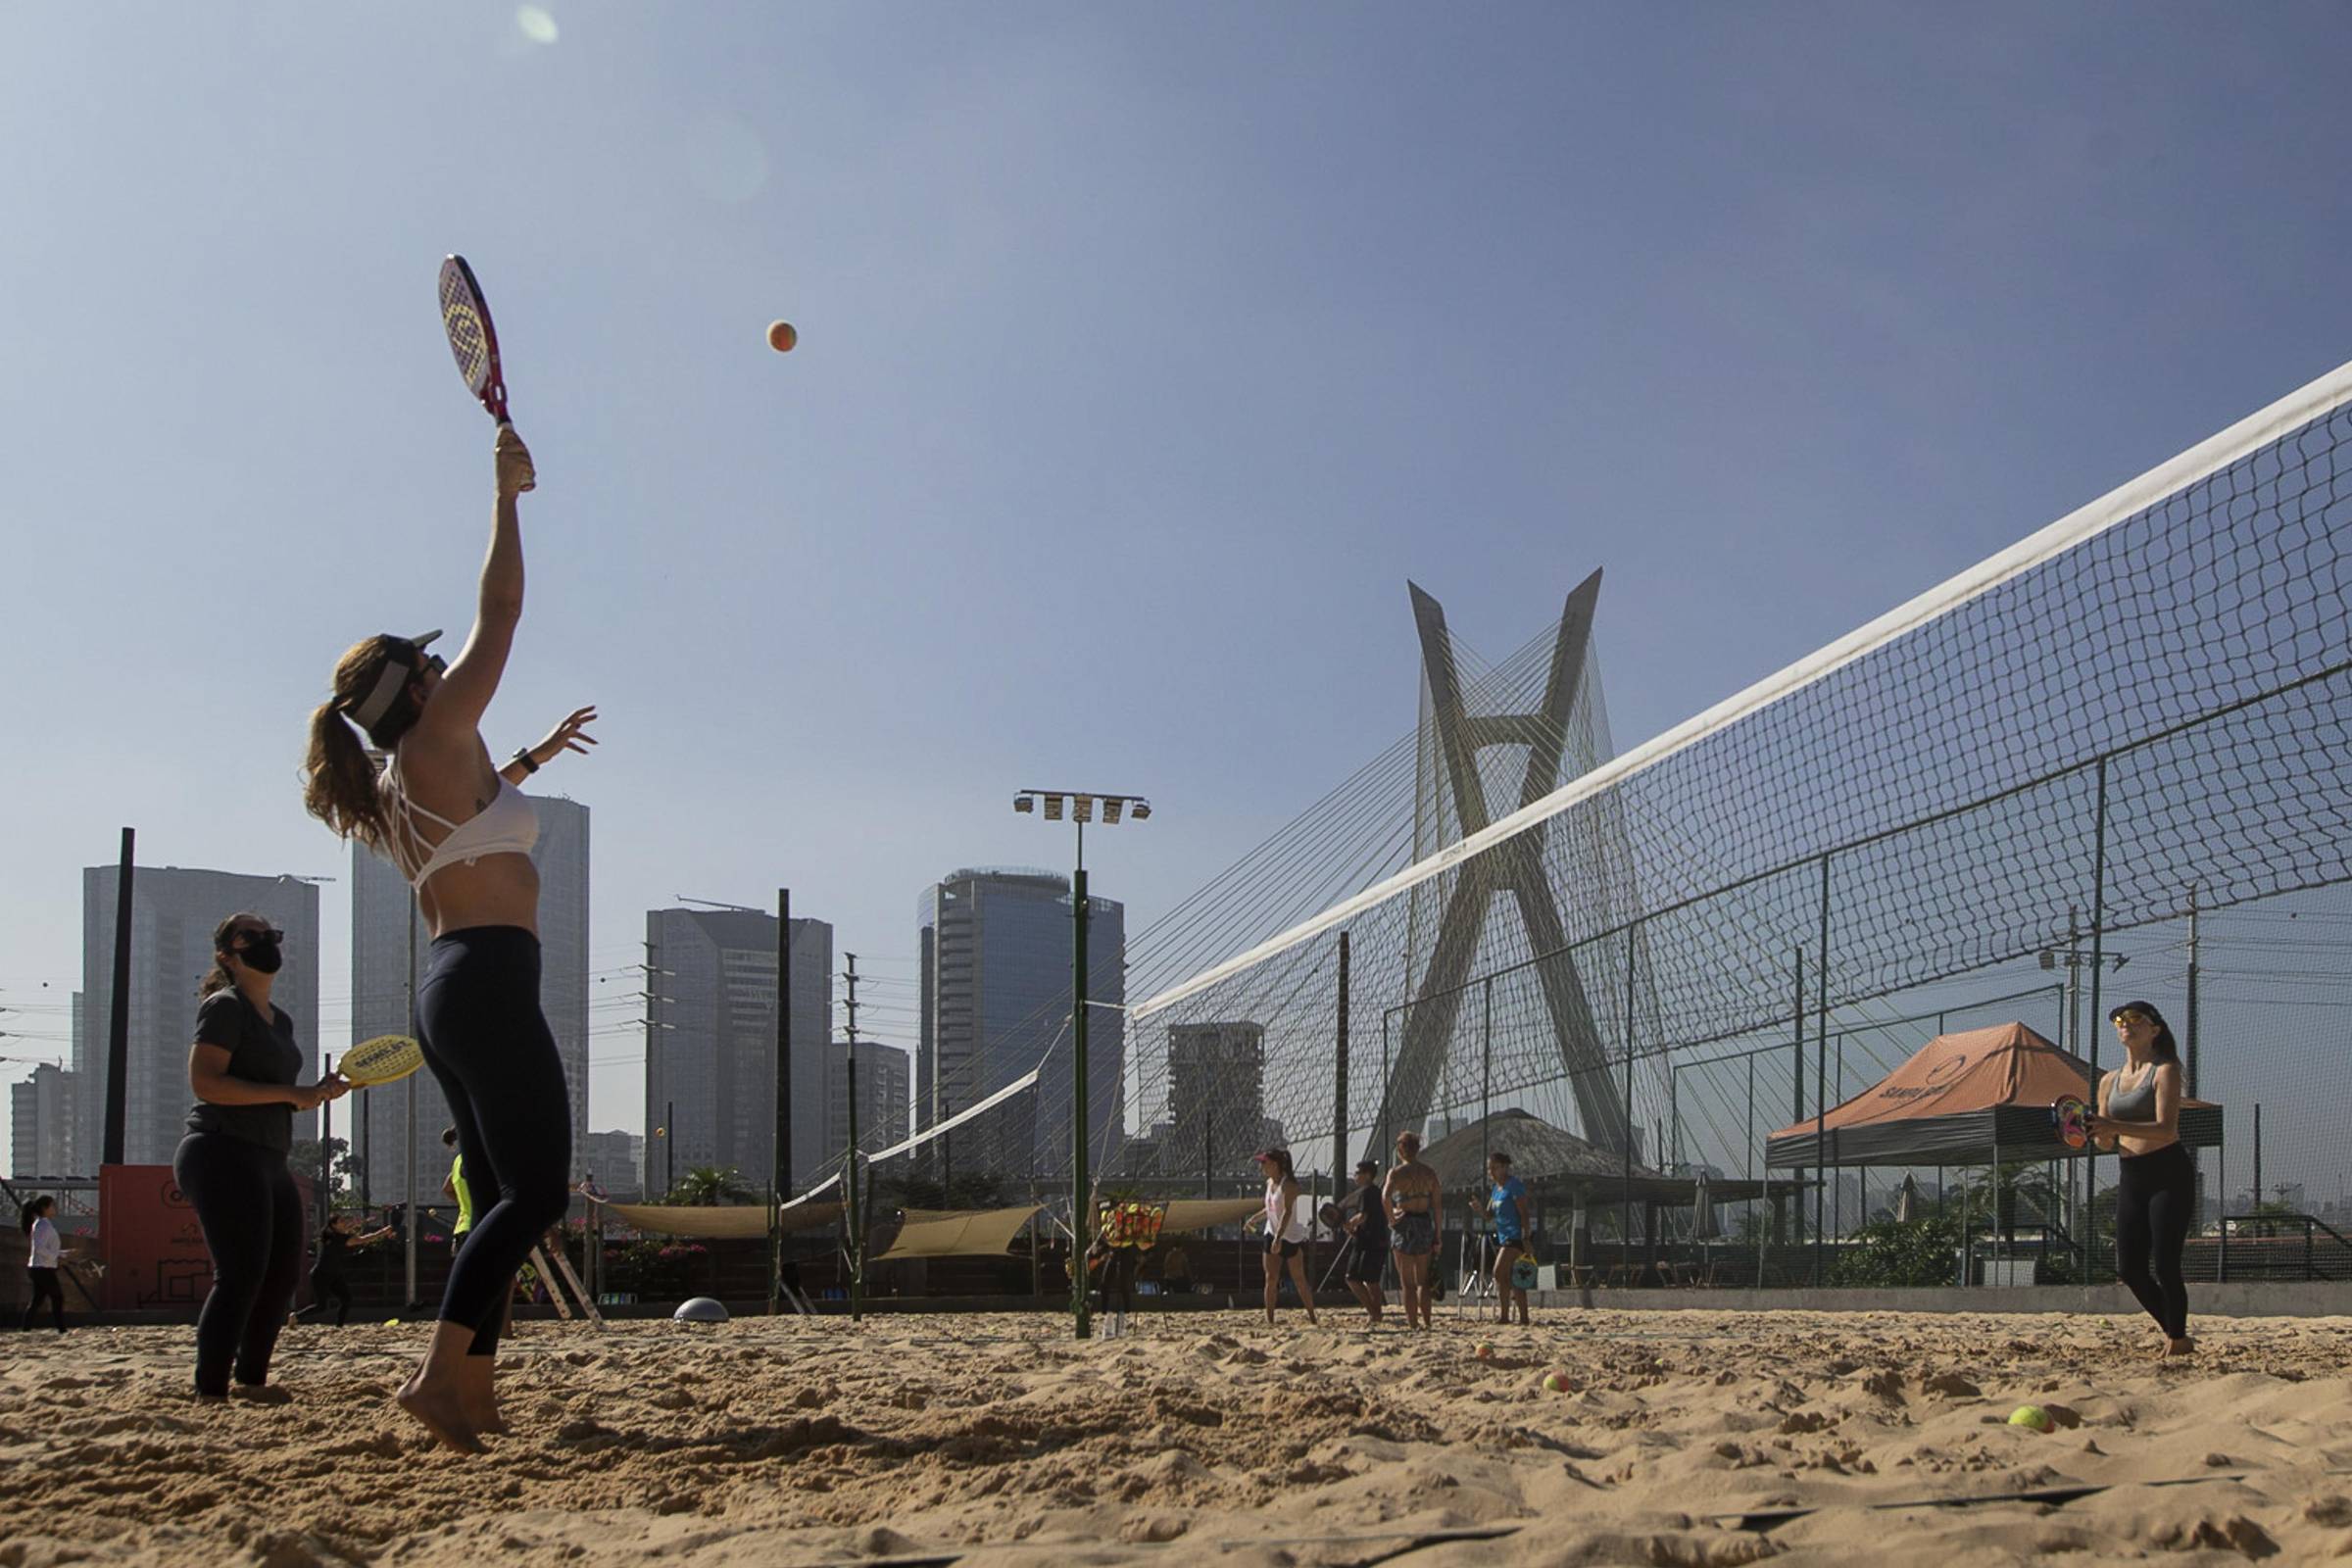 Beach tennis courts multiply by SP and become São Paulo beach in the